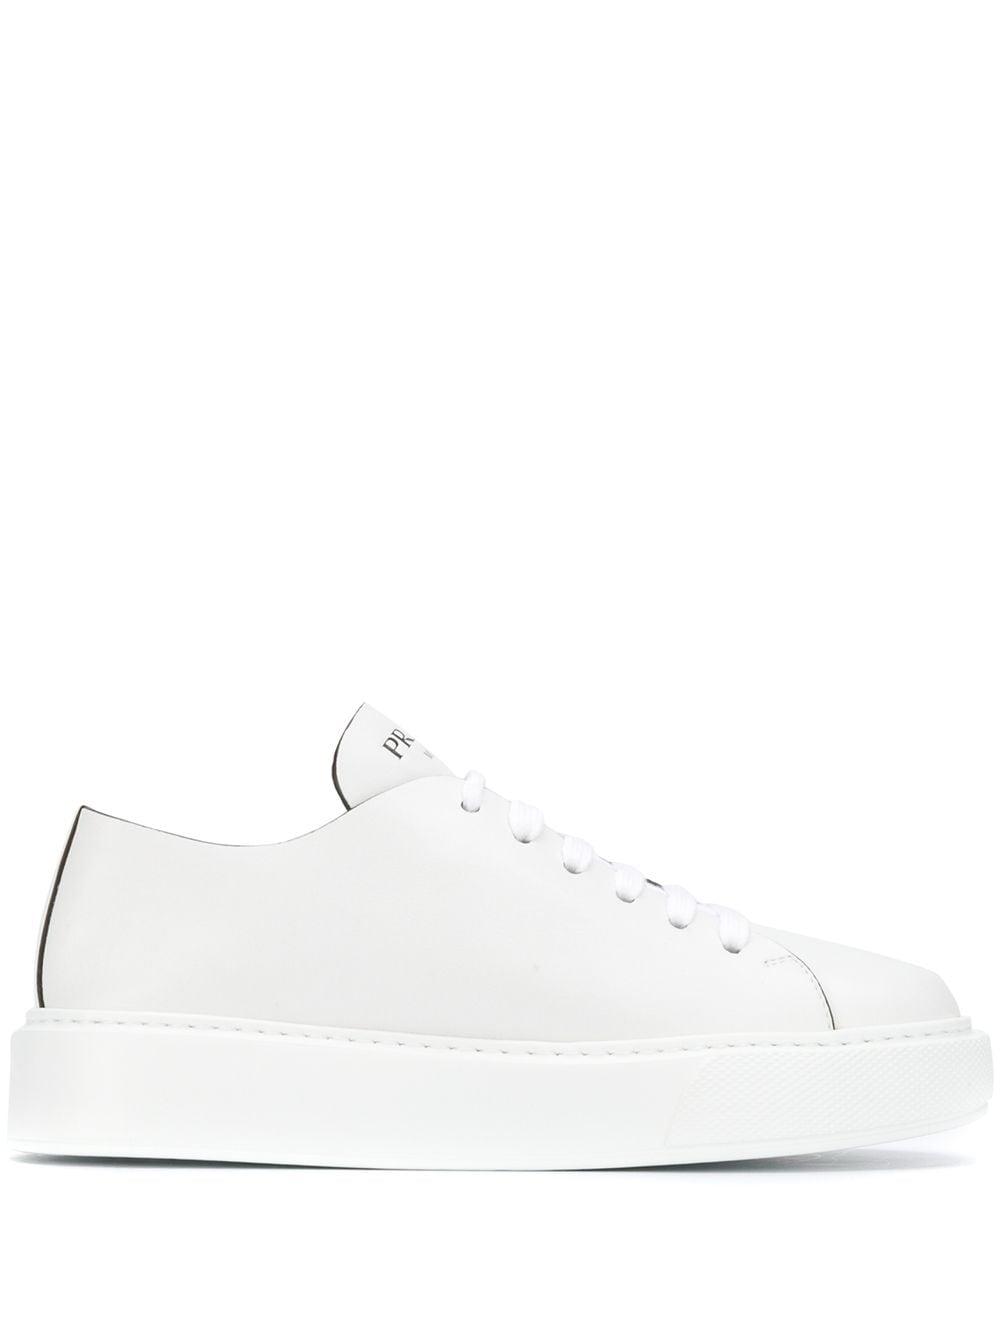 Prada Leather Low-top Sneakers in White | Lyst